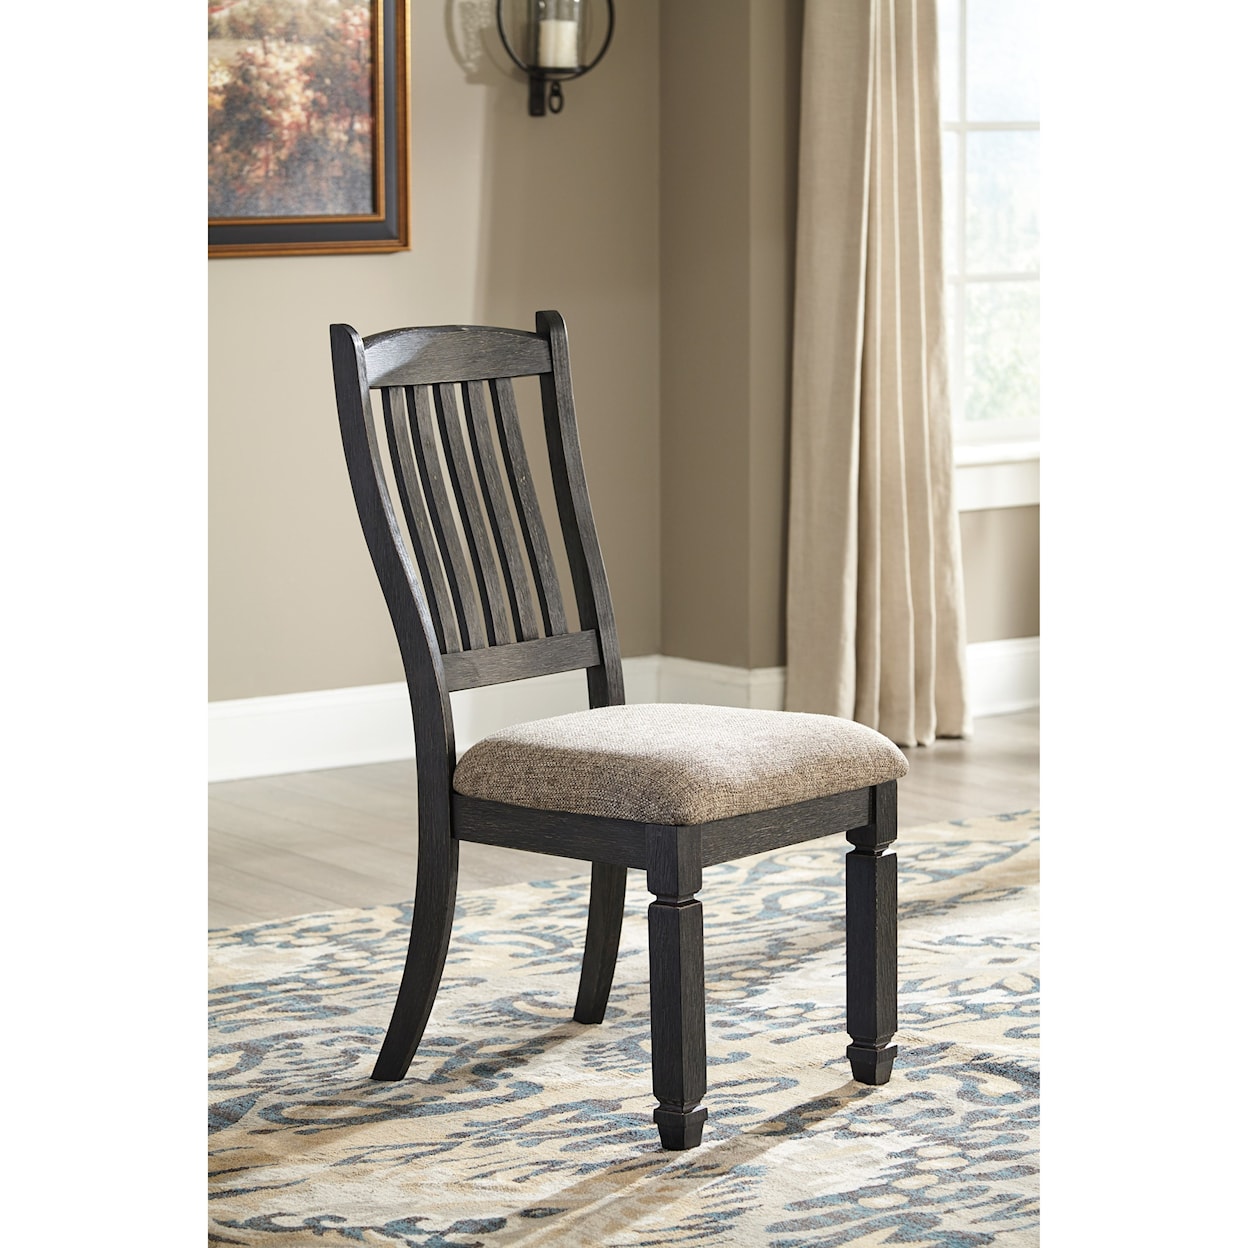 Signature Design by Ashley Furniture Tyler Creek 7-Piece Table and Chair Set